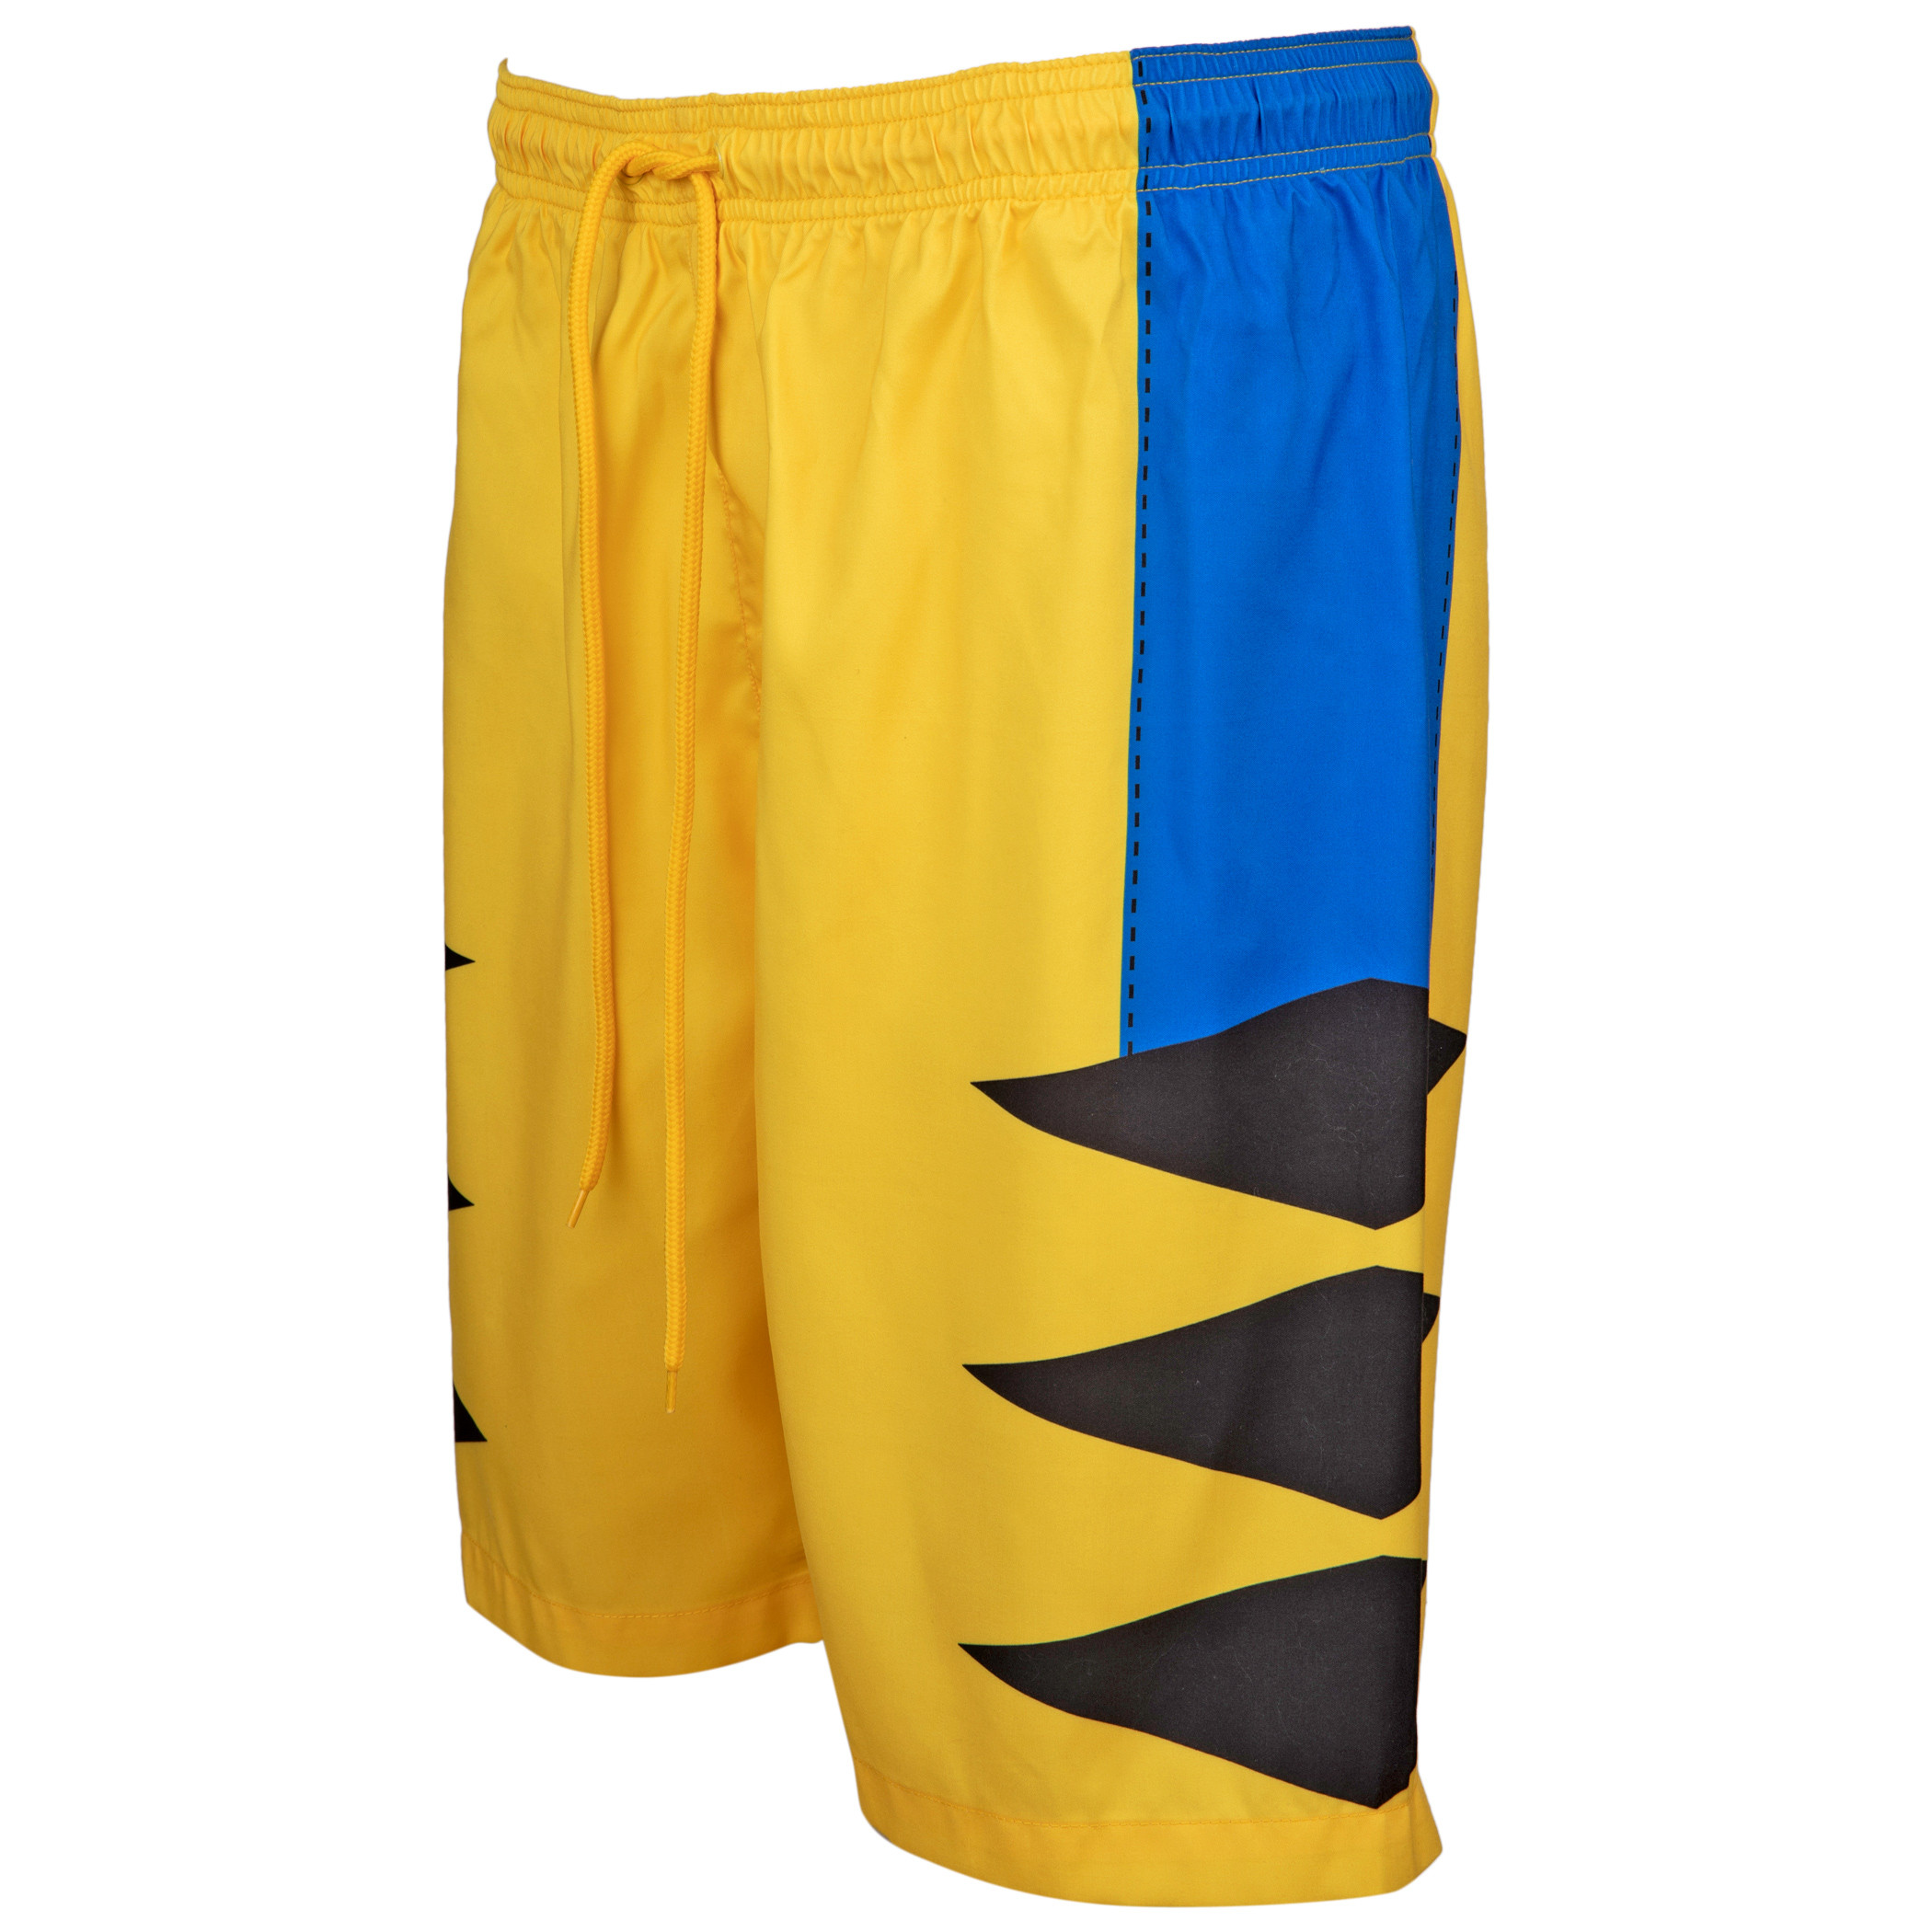 X-Men's Wolverine Character Costume Board Shorts